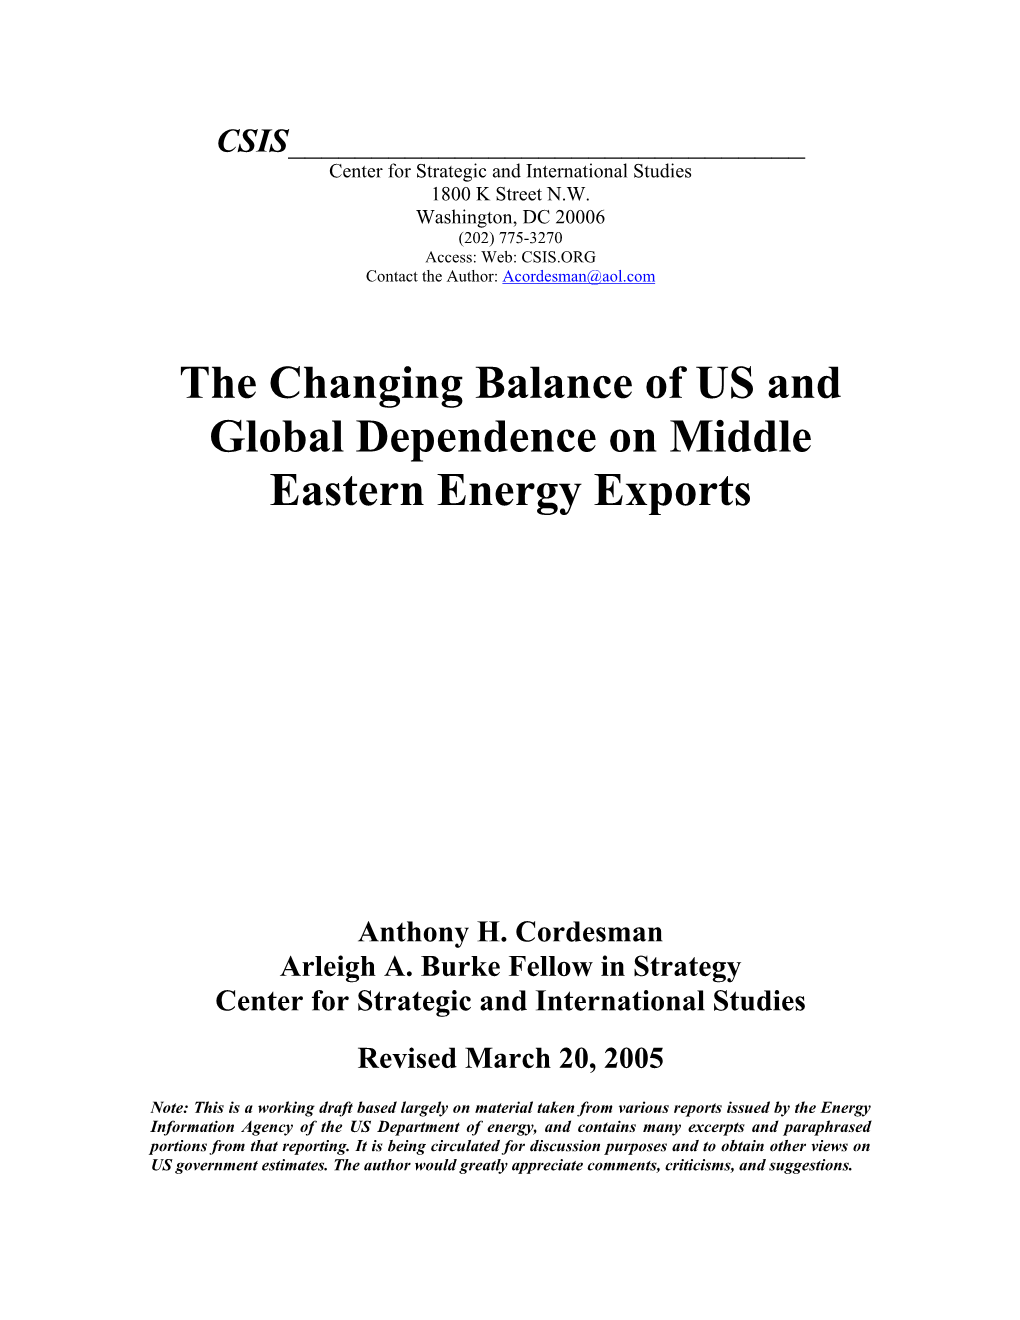 The Changing Balance of US and Global Dependence on Middle Eastern Energy Exports